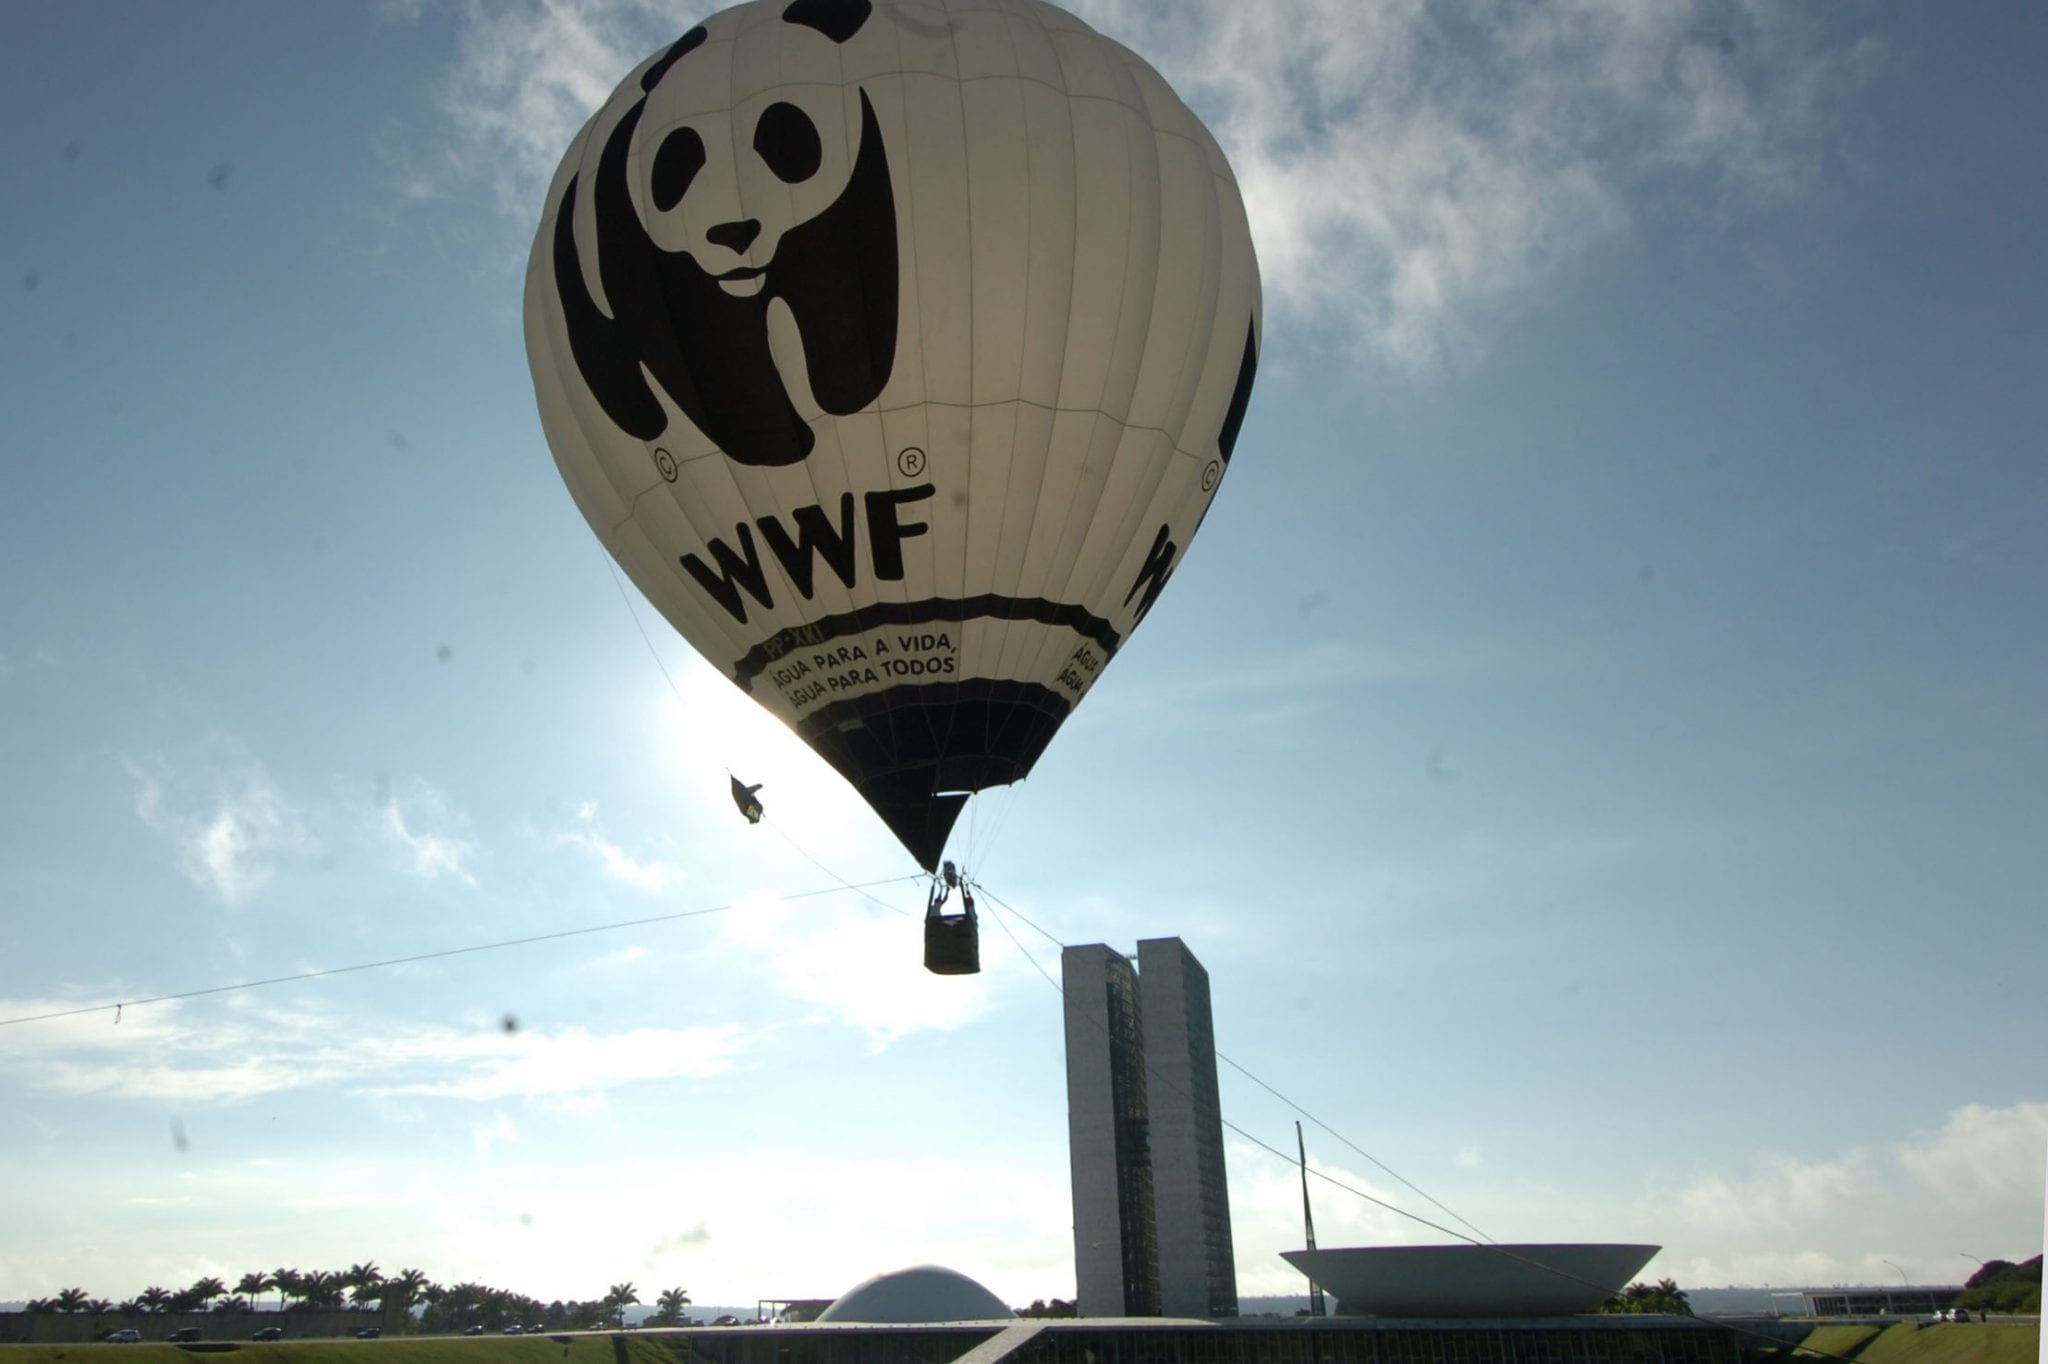 Why Should We Save The Giant Panda- WWF Hot Air Balloon